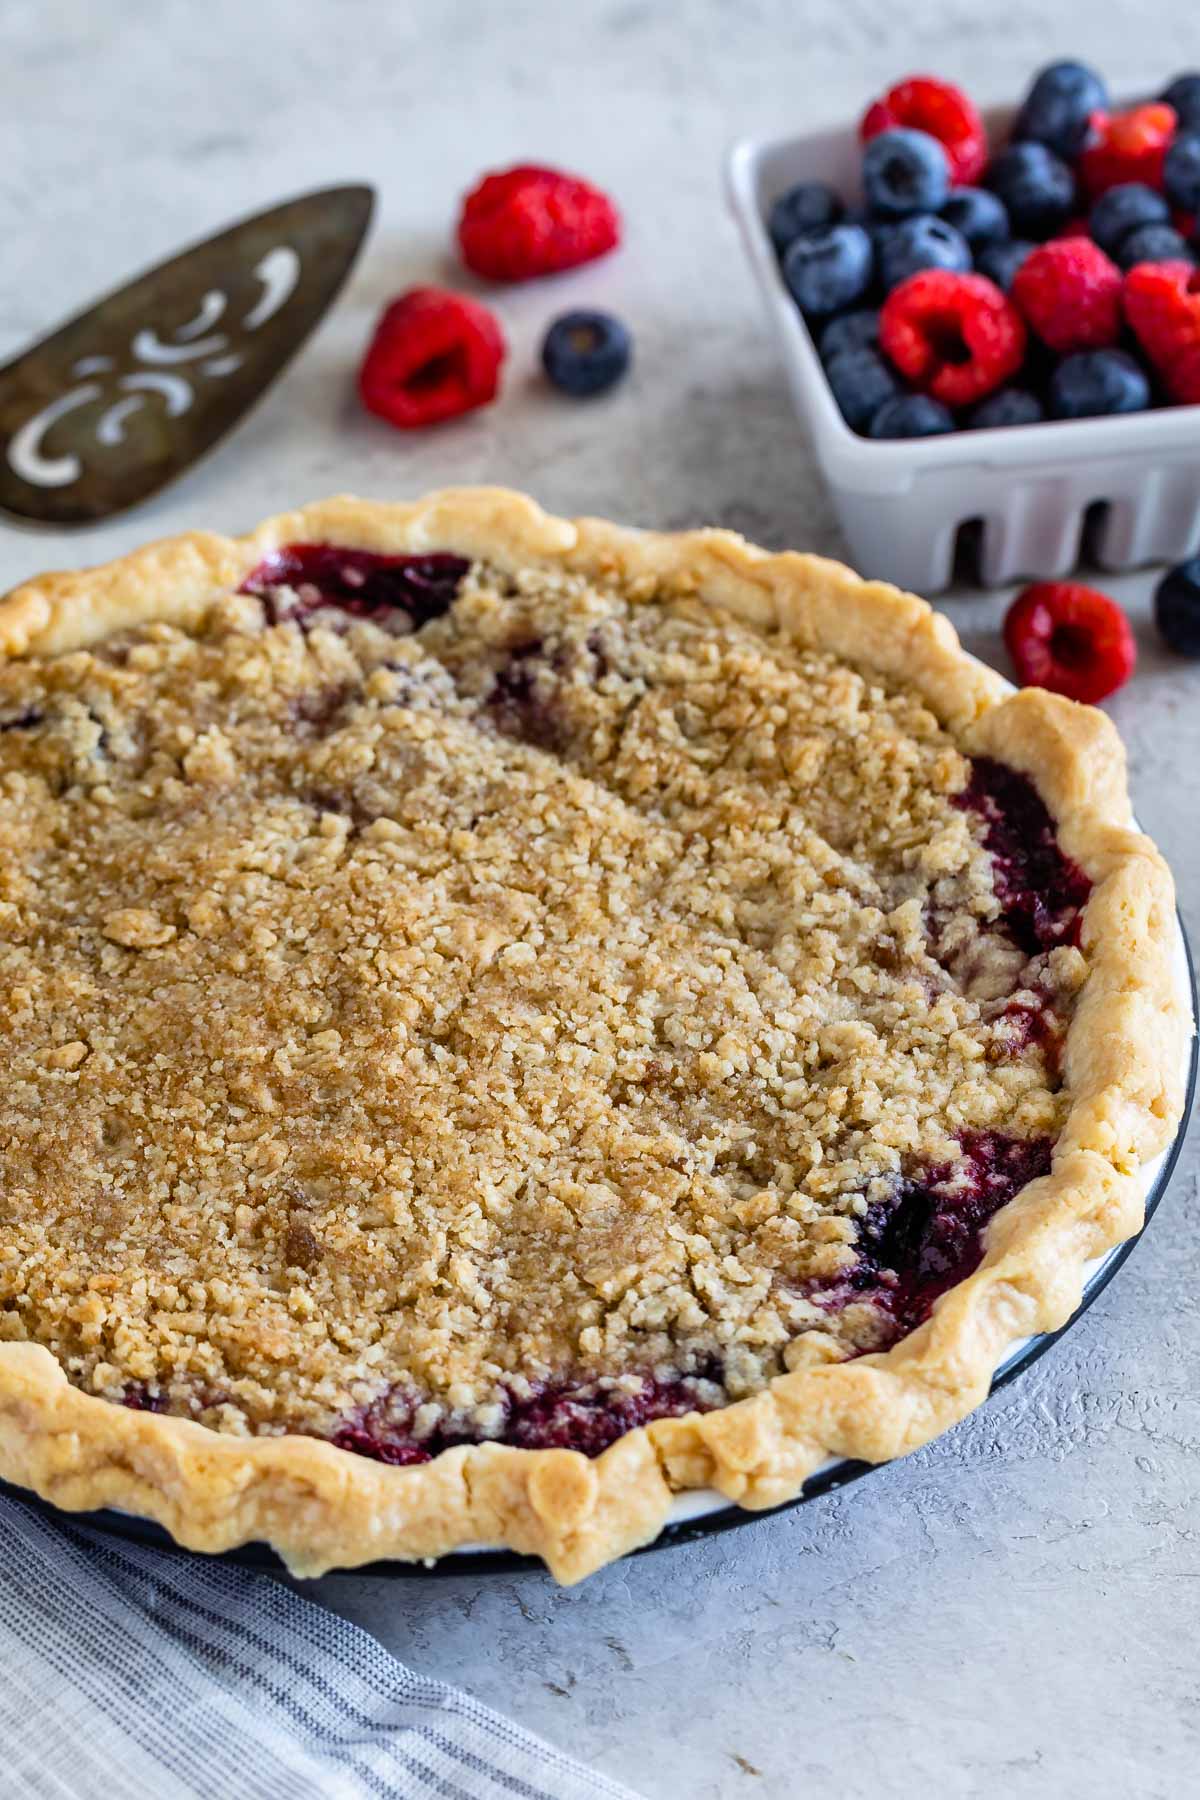 Mixed berry pie with crumble topping next to a basket of raspberries and blueberries